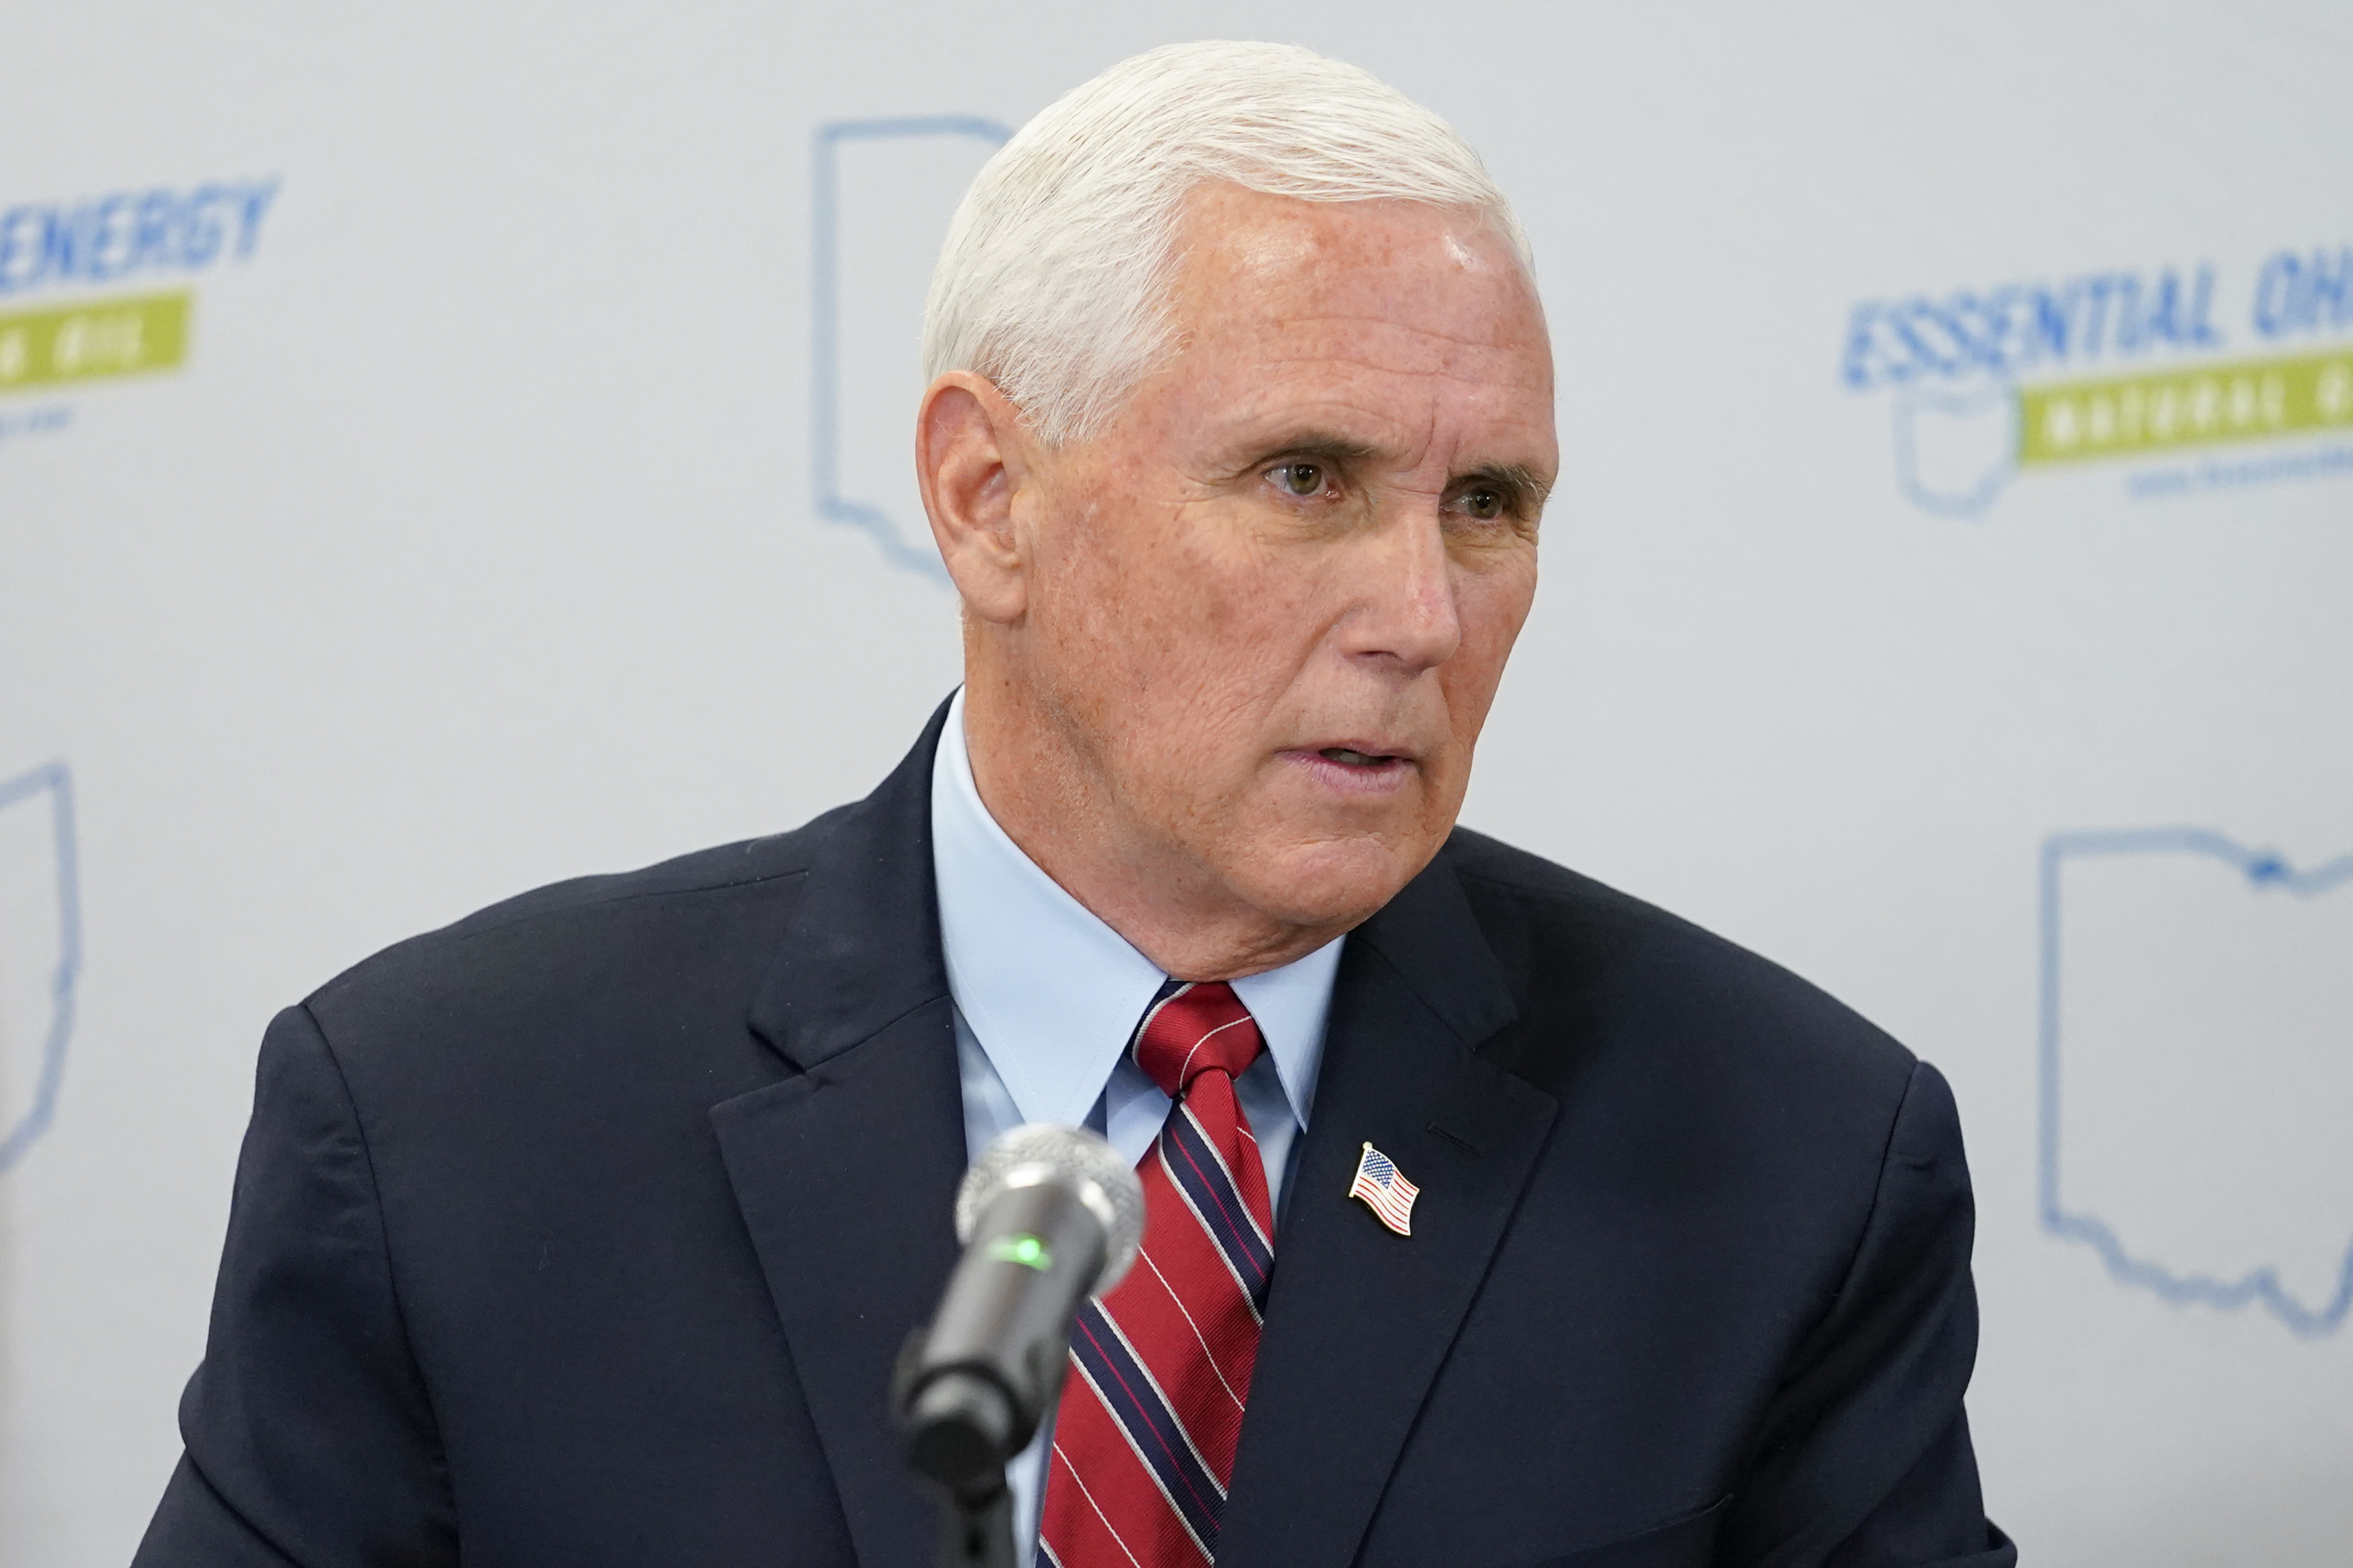 Former Vice President Mike Pence speaks at the Gas Energy Education Program roundtable discussion at Enerfab, Thursday, June 16, 2022, in Cincinnati.